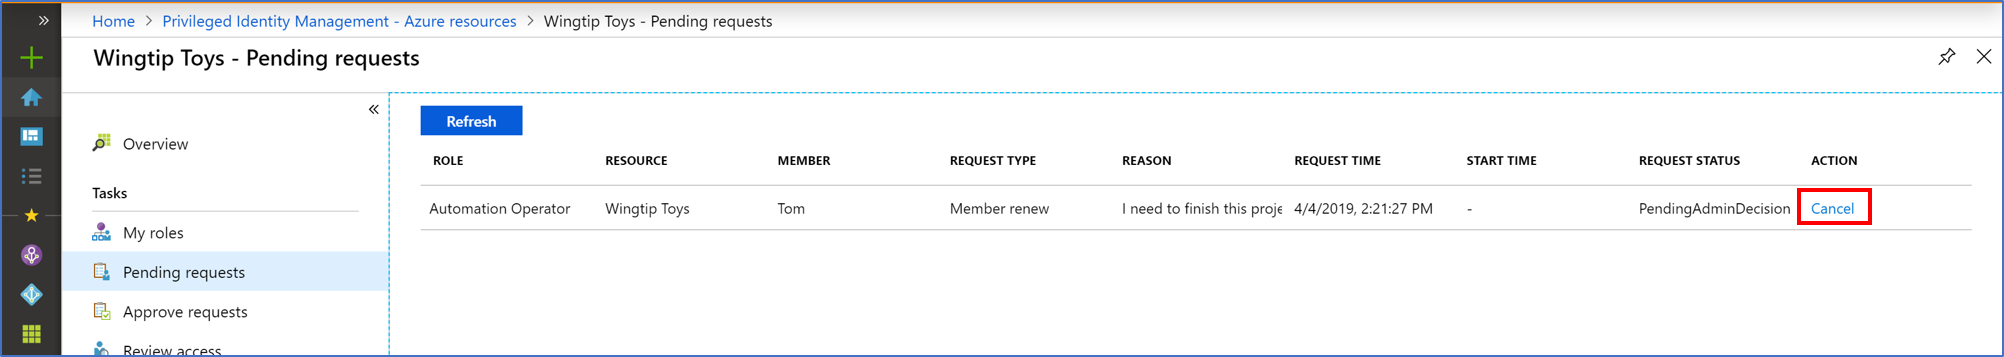 Screenshot of Azure resources - Pending requests page listing any pending requested and a link to Cancel.